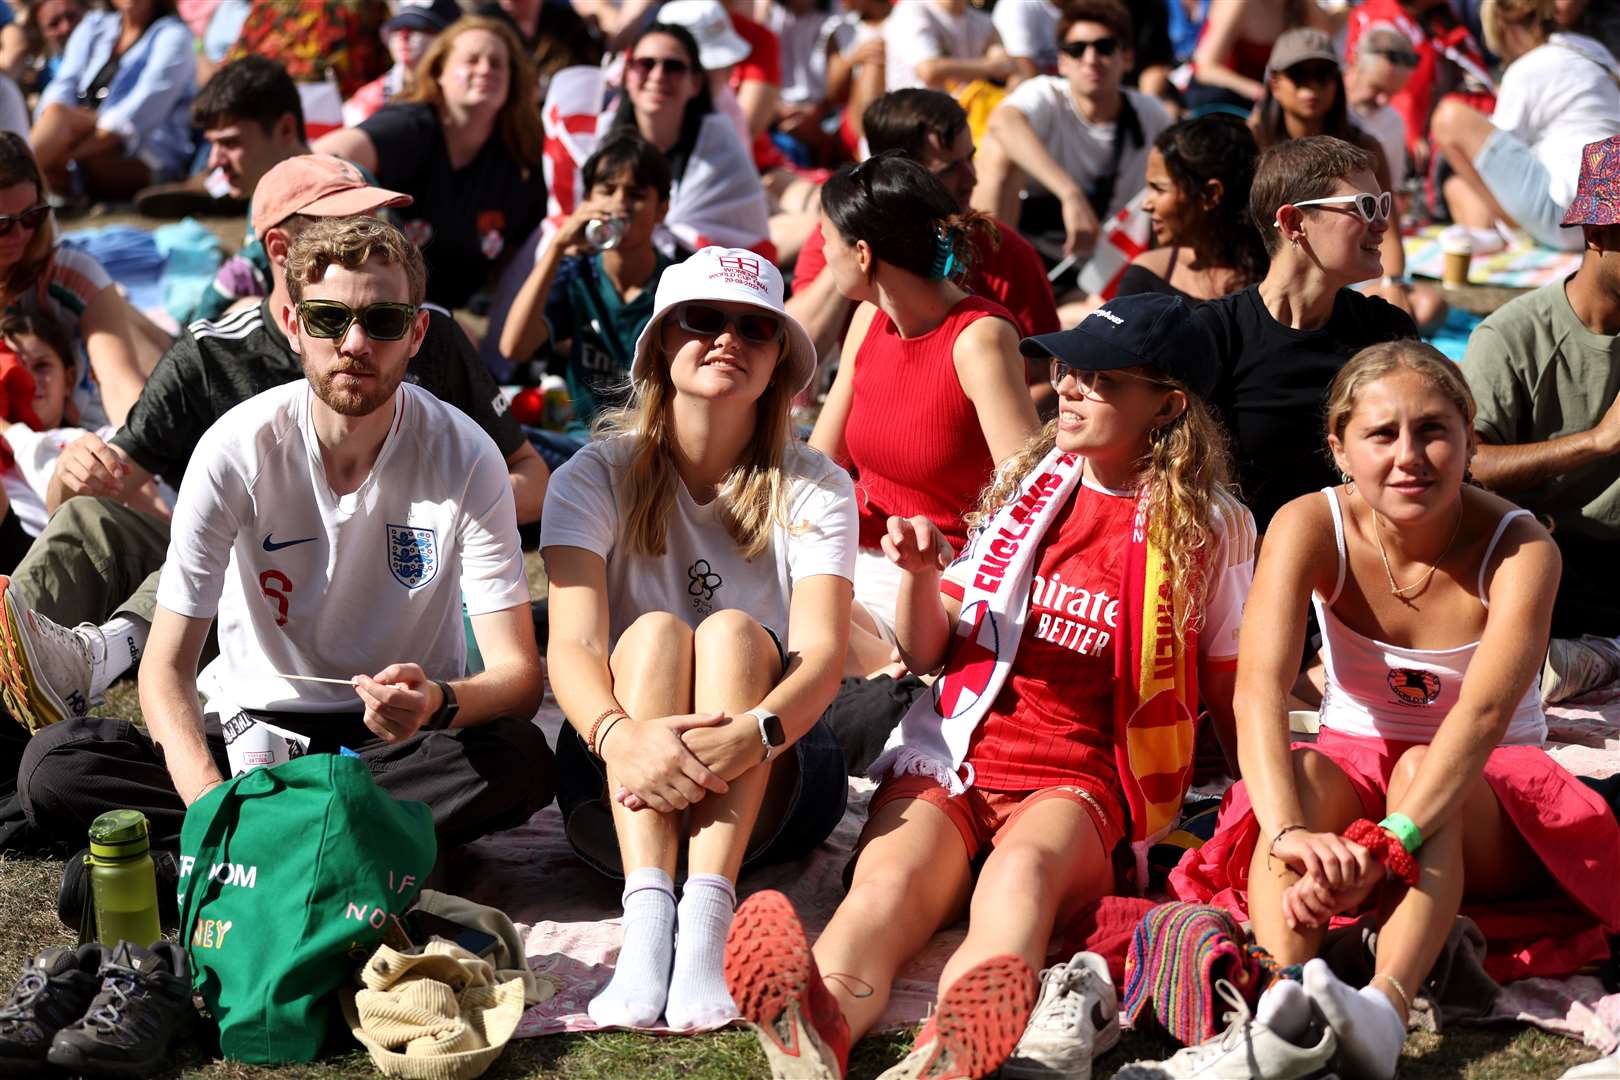 England fans gathered to watch the final (Steven Paston/PA)